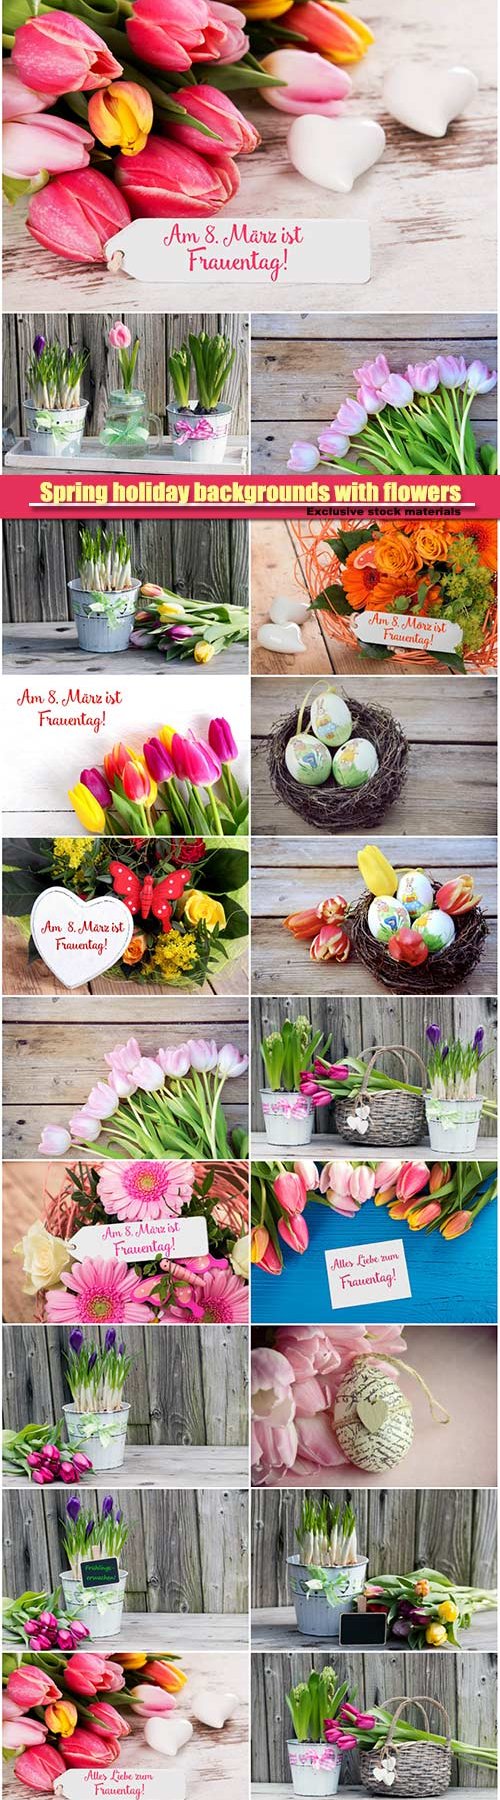 Spring holiday backgrounds with flowers